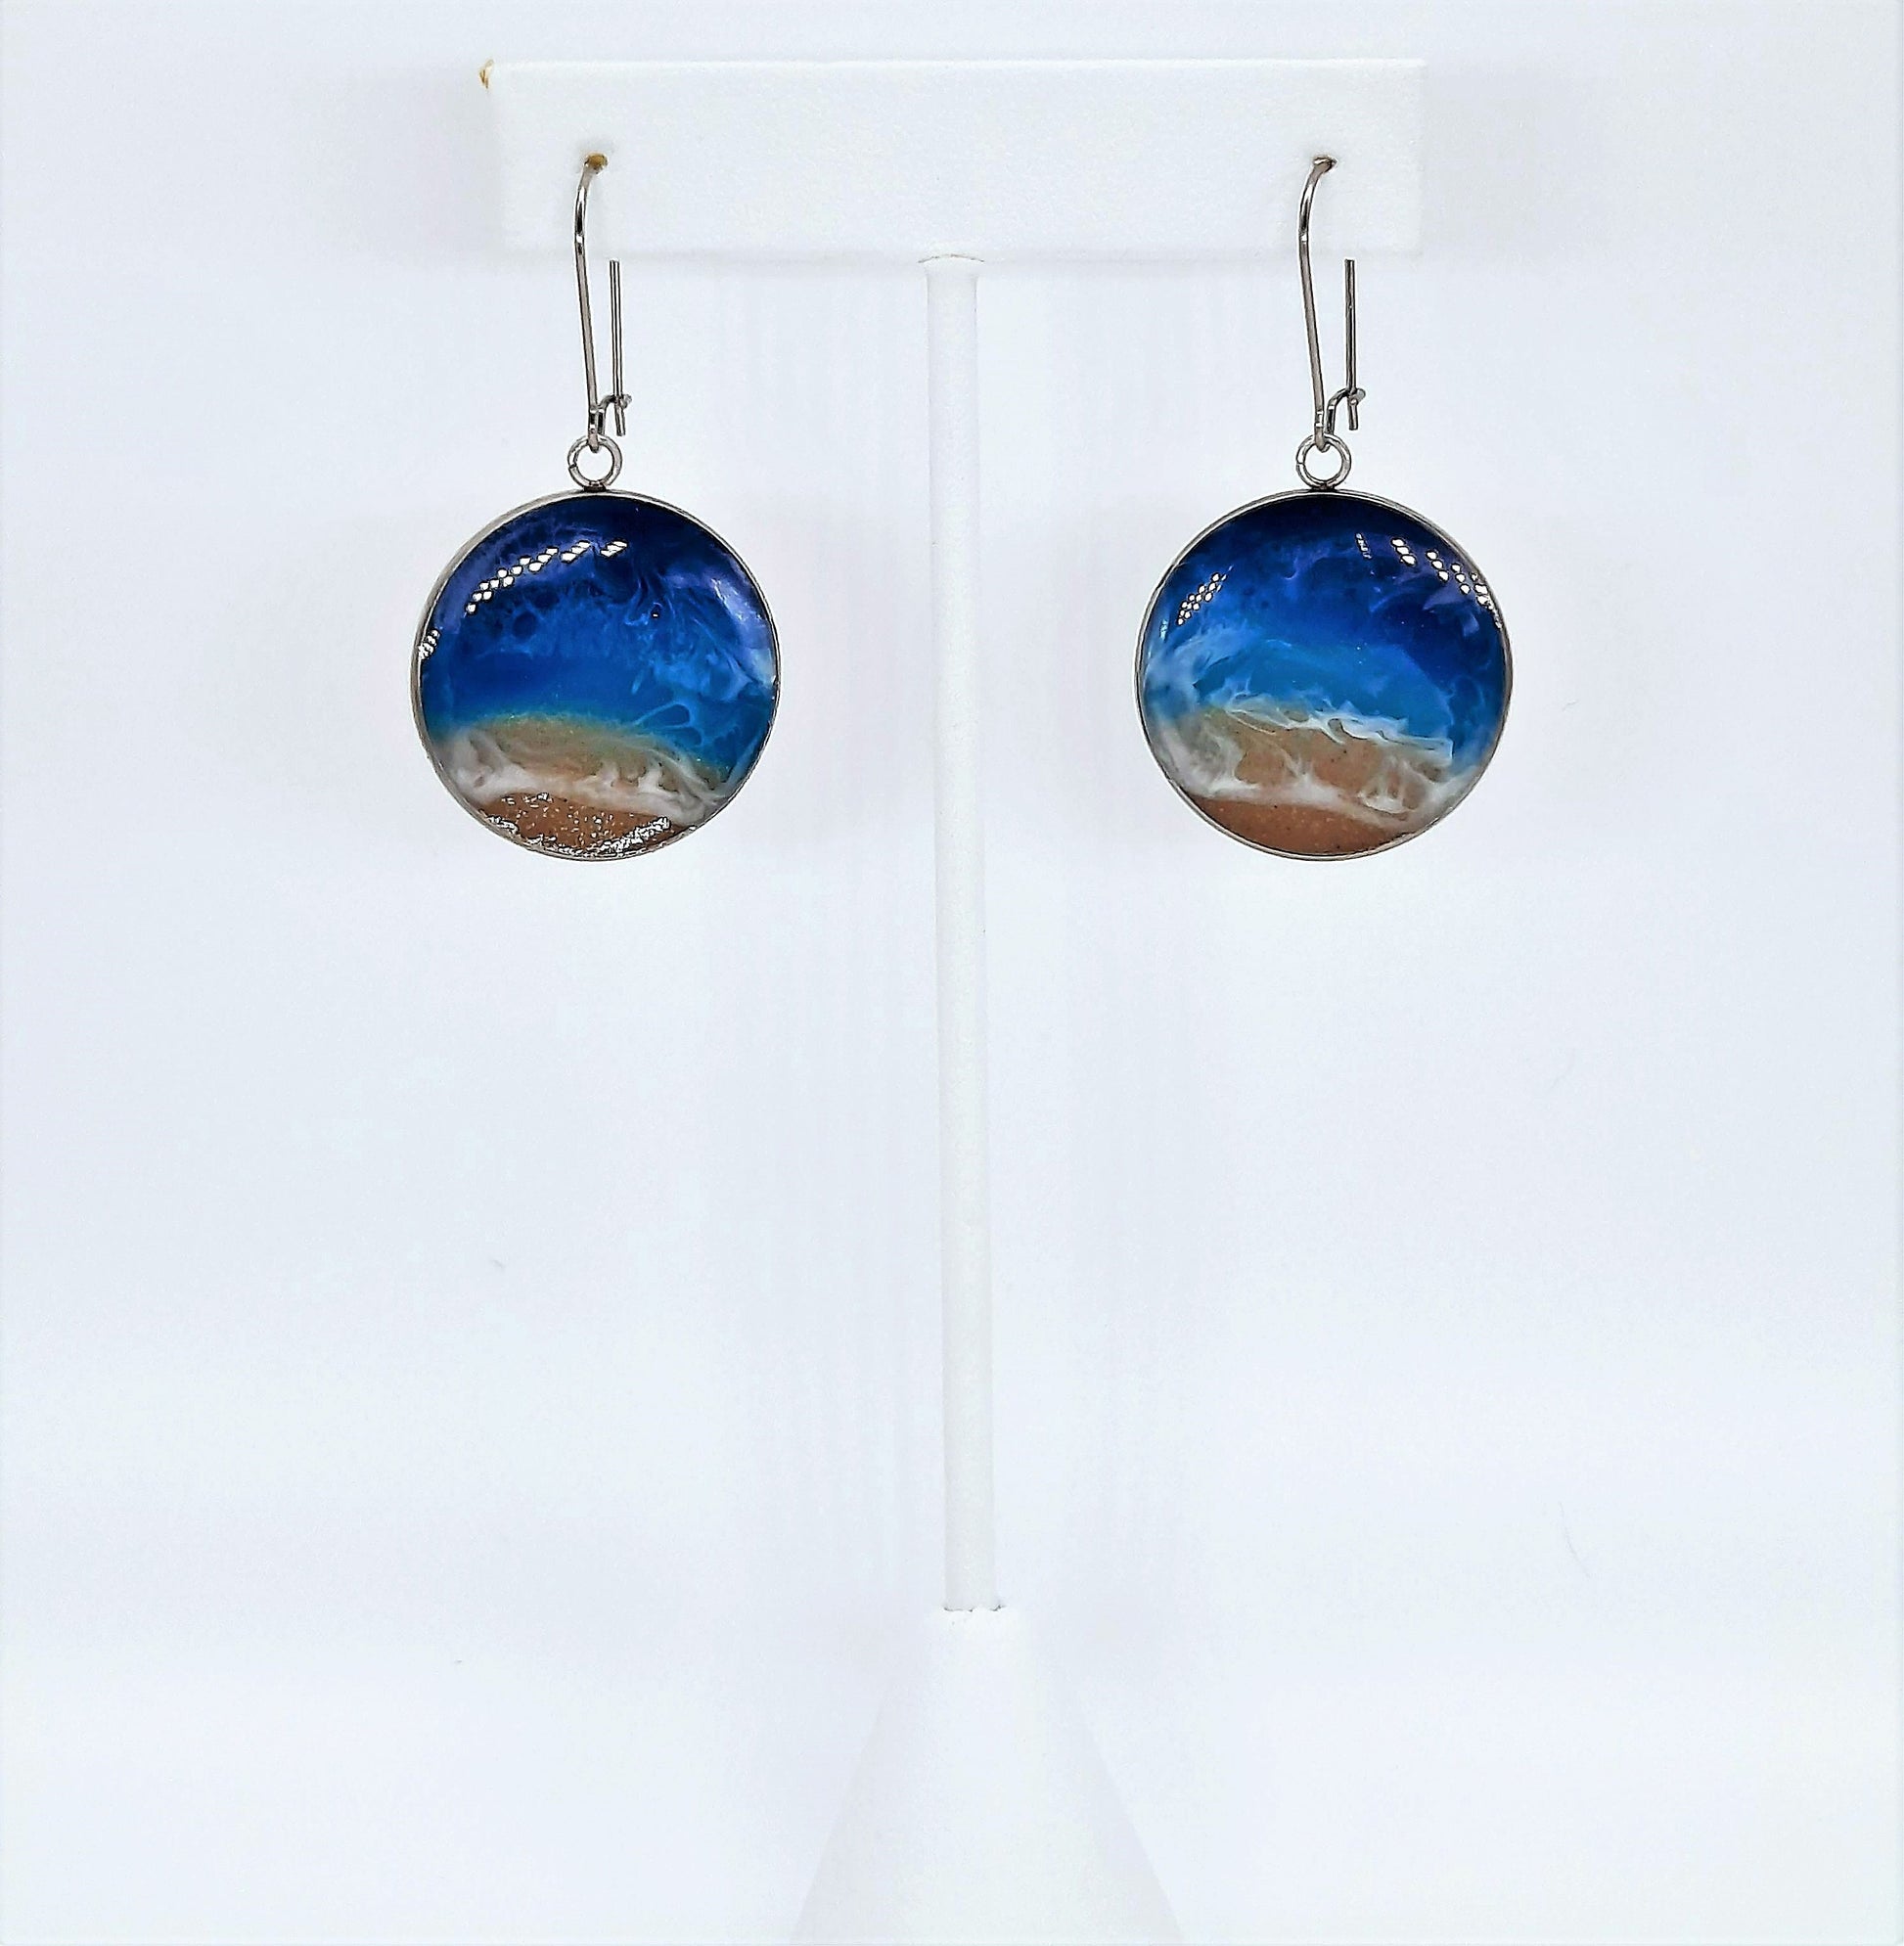 Resin Waves / Ocean Earring and Necklace Set / Ocean Jewelry / Beach Scene / Made w/ Real Sand, Resin, Mica, Hypoallergenic Stainless Steel